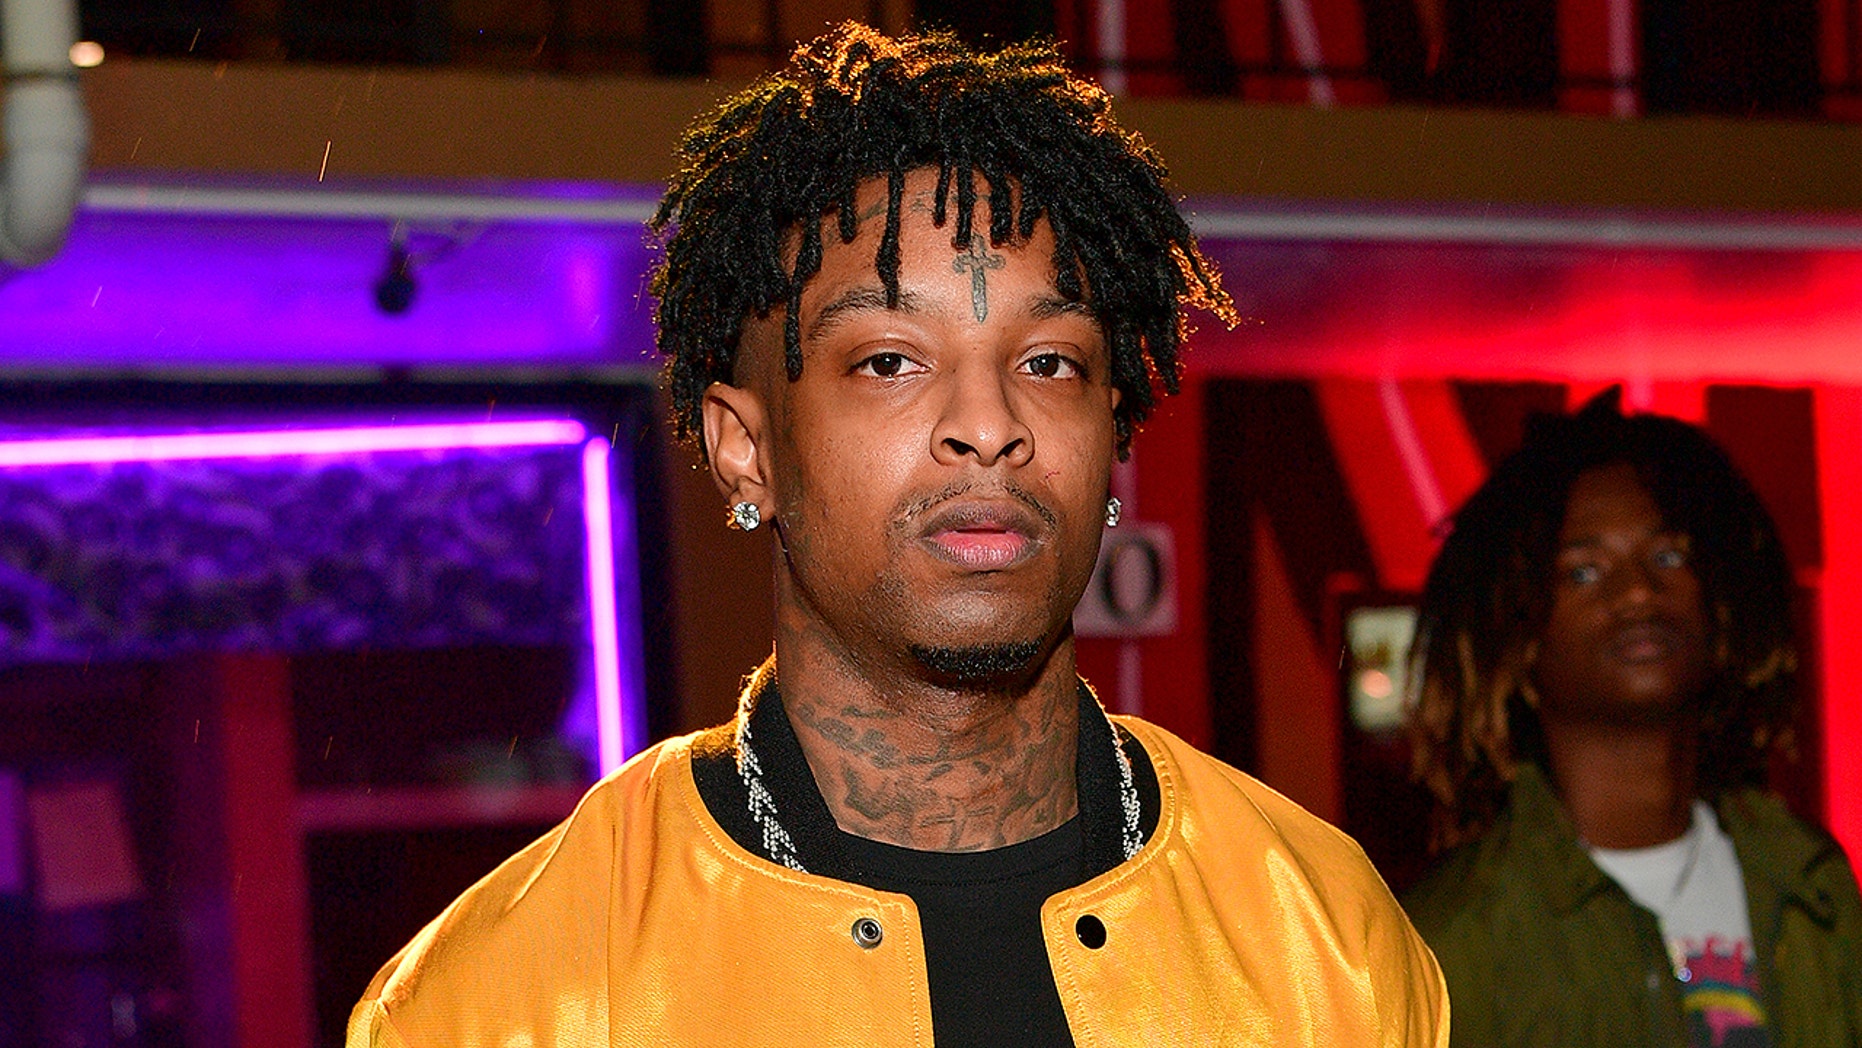 Rapper 21 Savage arrested by ICE at border: report